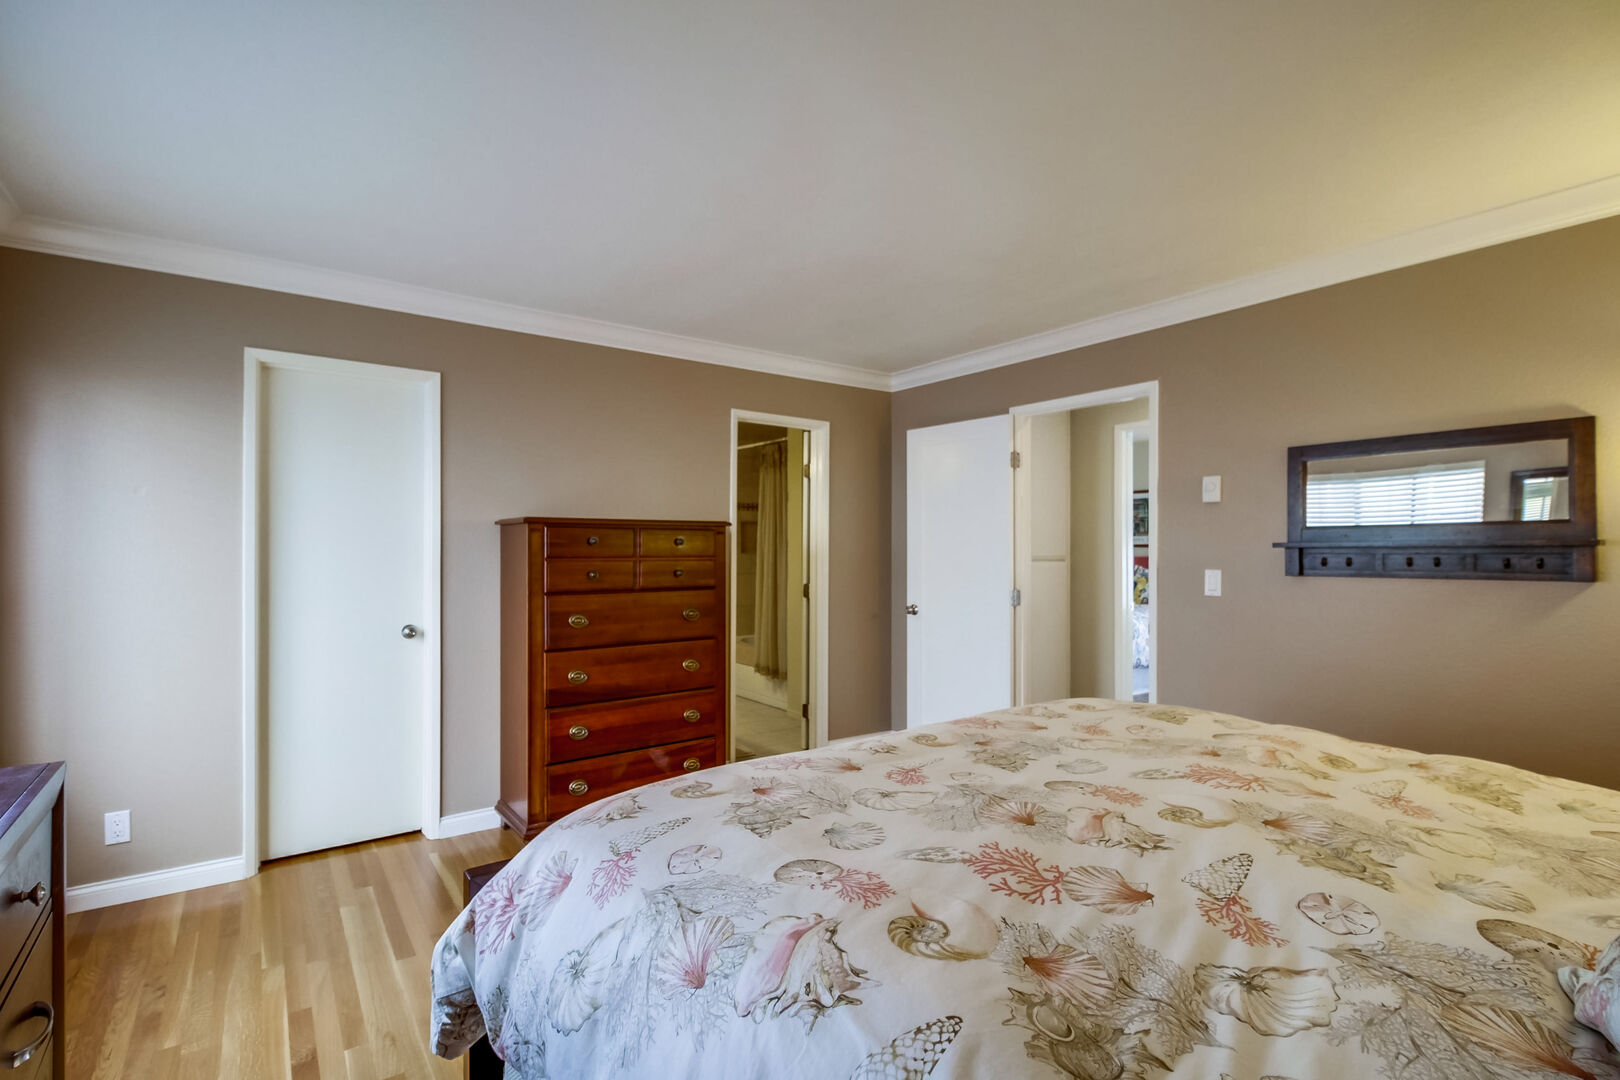 Master bedroom with king size bed, dresser and drawer space, ensuite bathroom and walk-in closet